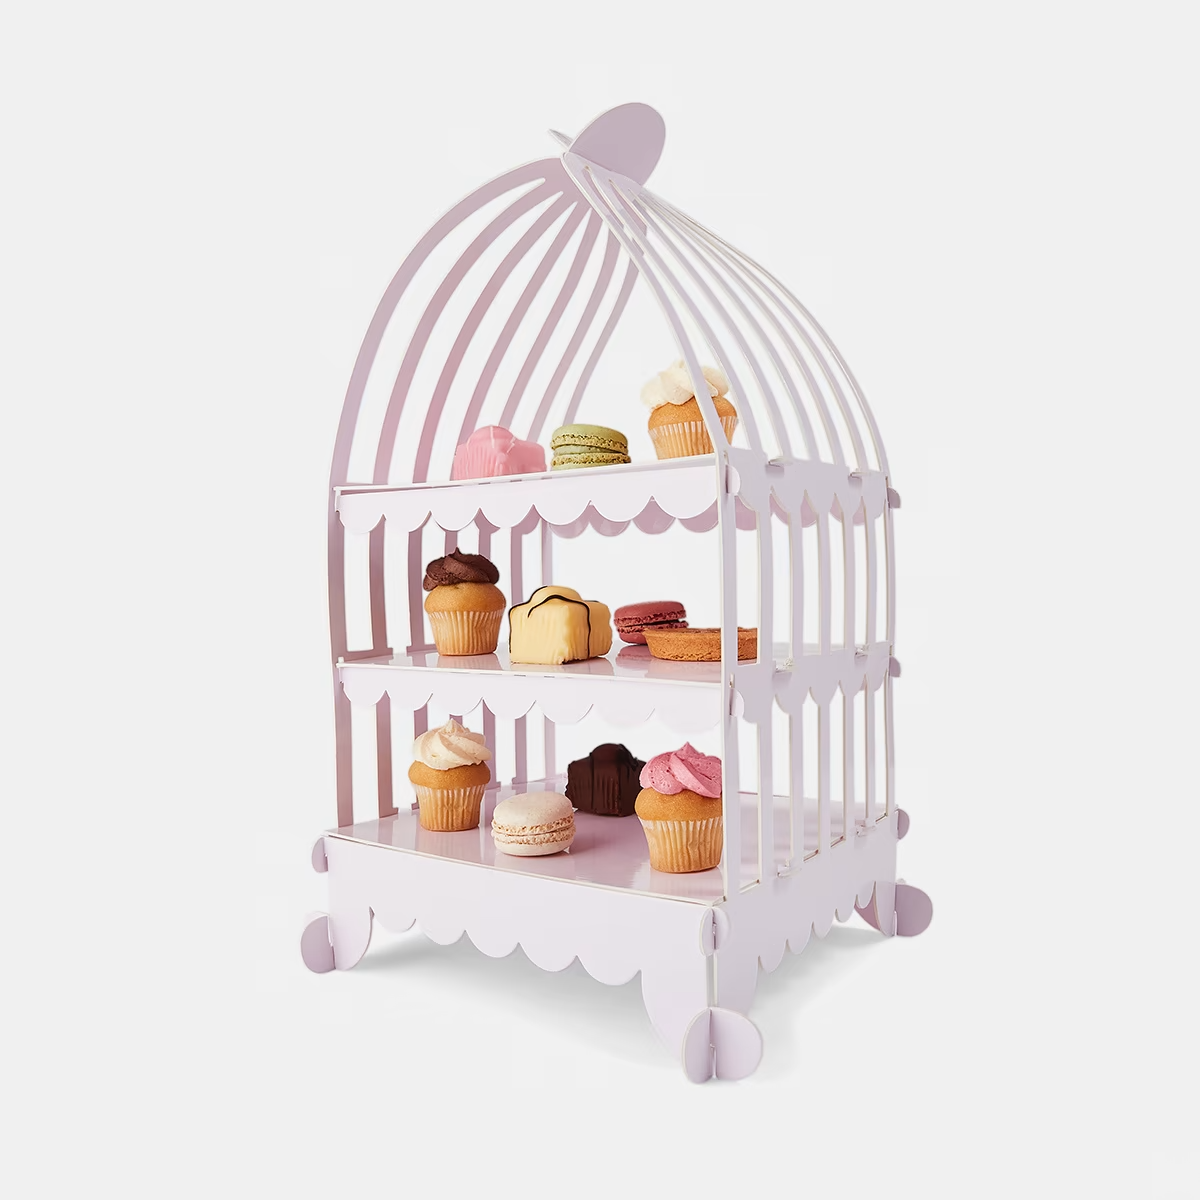 3 Tier Tool Cake Plate Food Stand Fruit Party Serving Cupcake Wedding Fairy Tale